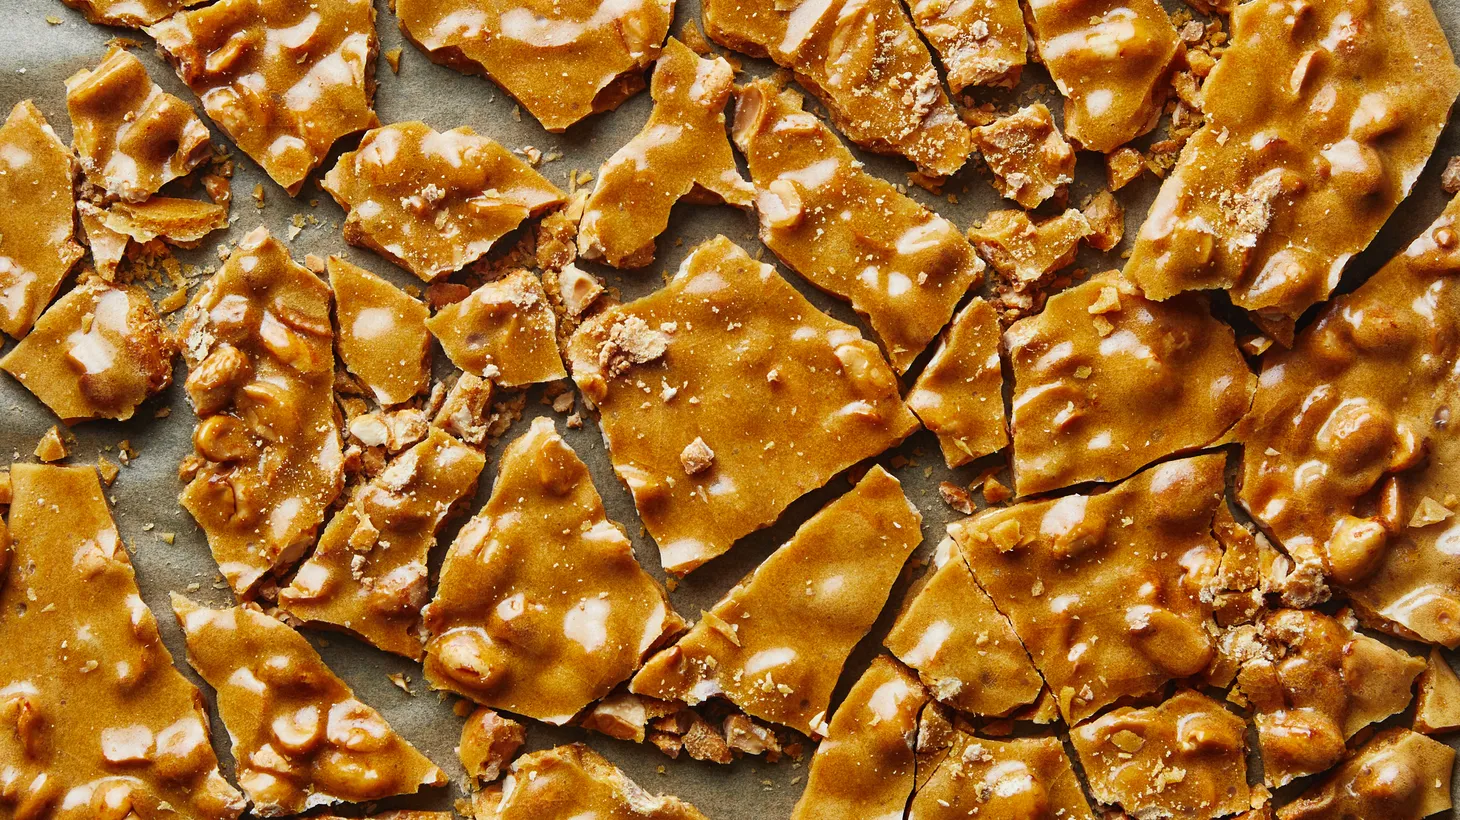 If you want to get into candy making, brittle is a great place to start because, as Sohla El-Waylly points out, it's not difficult and you can add just about anything to it.